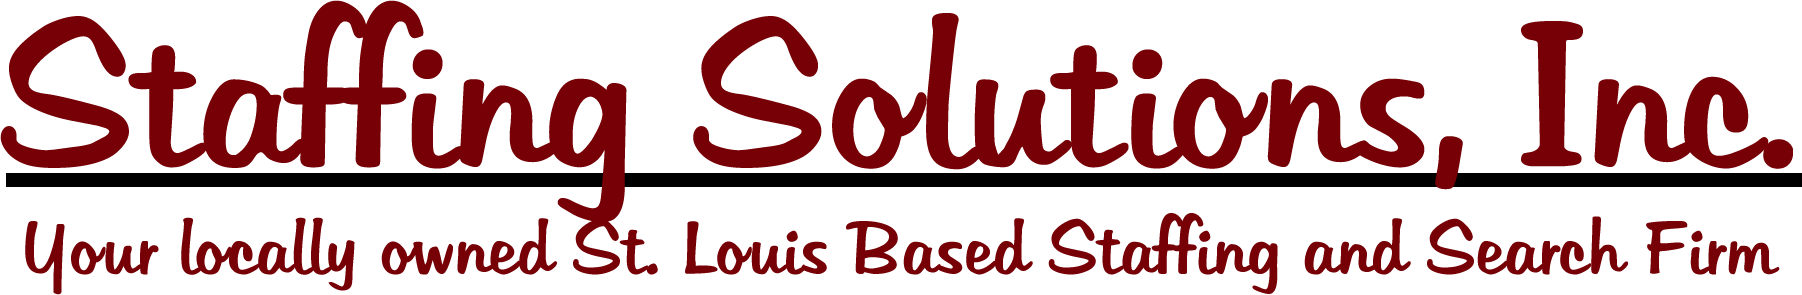 Staffing Solutions Logo